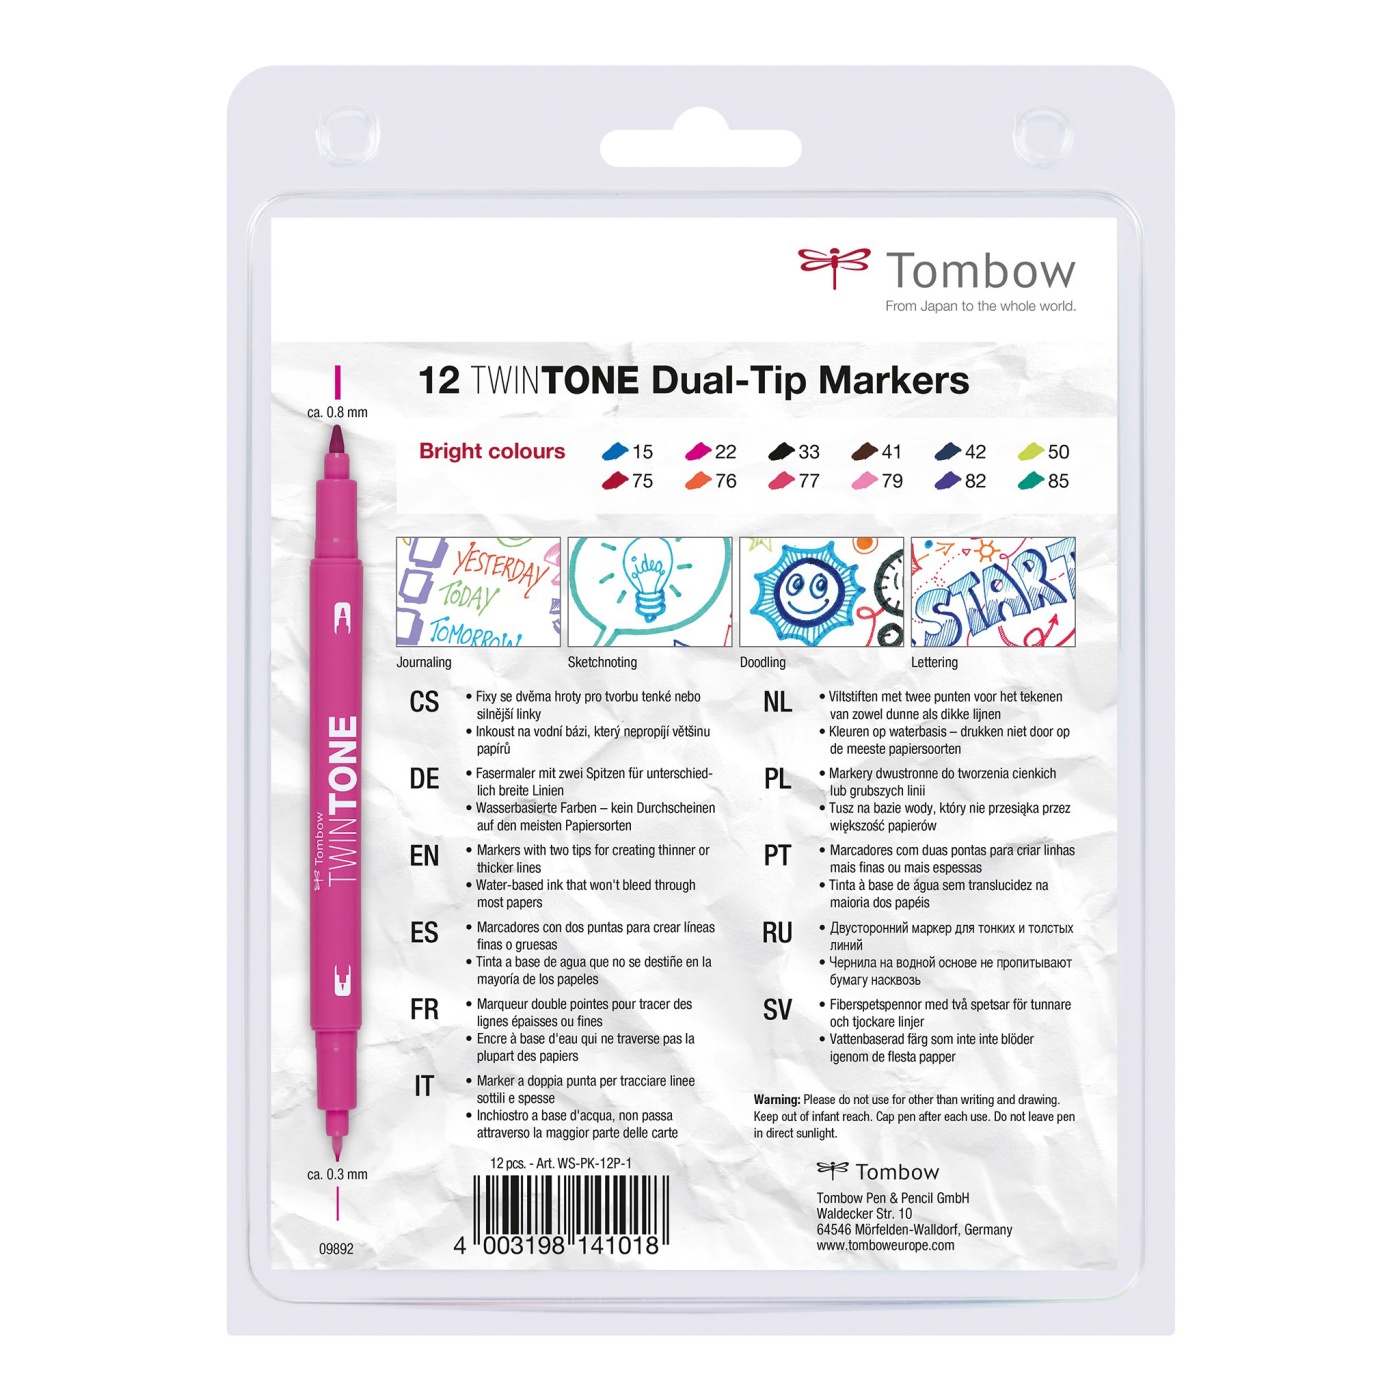 TwinTone Marker Bright 12-pack in the group Pens / Artist Pens / Felt Tip Pens at Pen Store (101103)